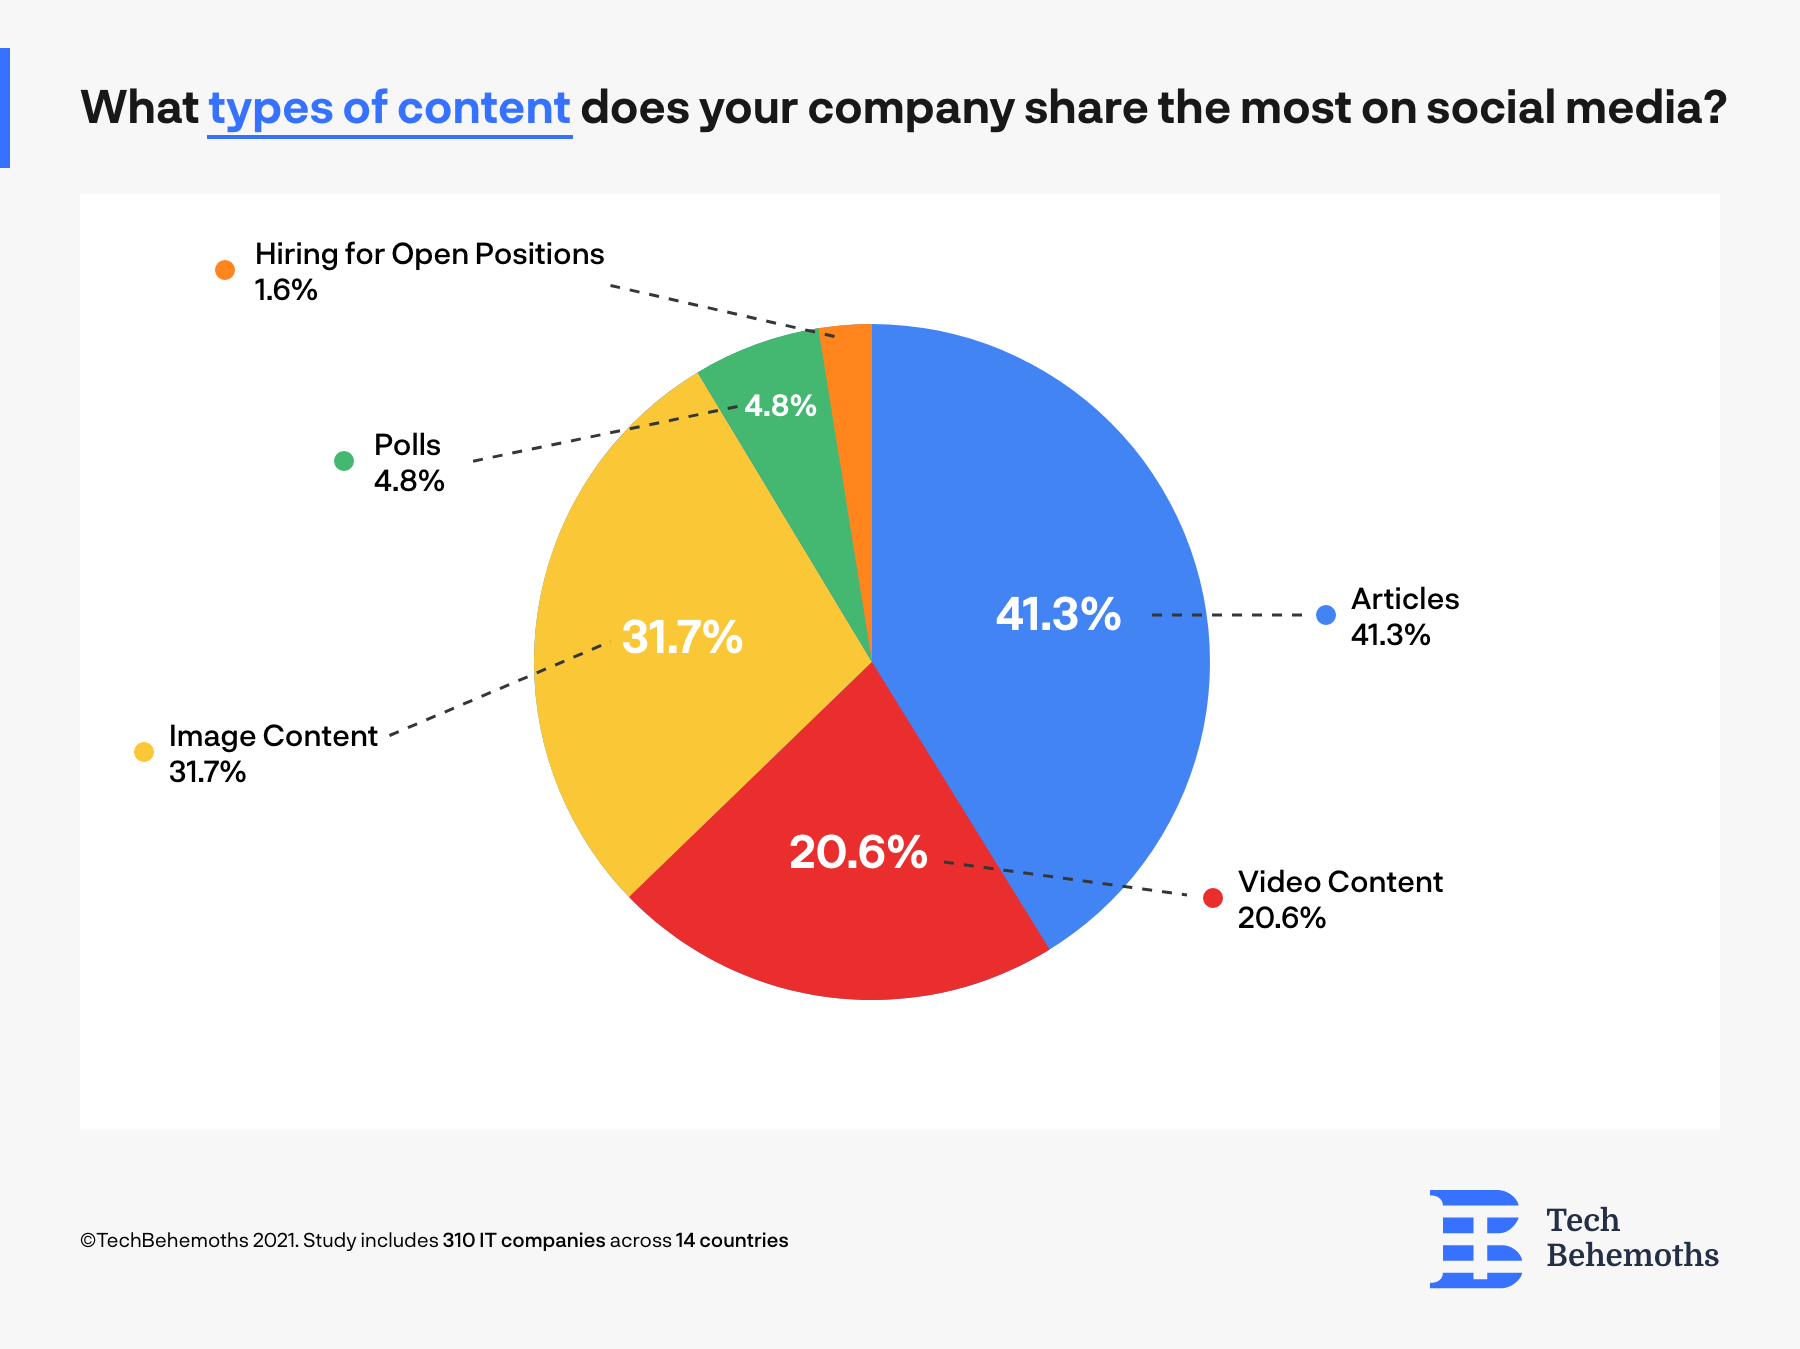 Types of content shared by IT companies on social media